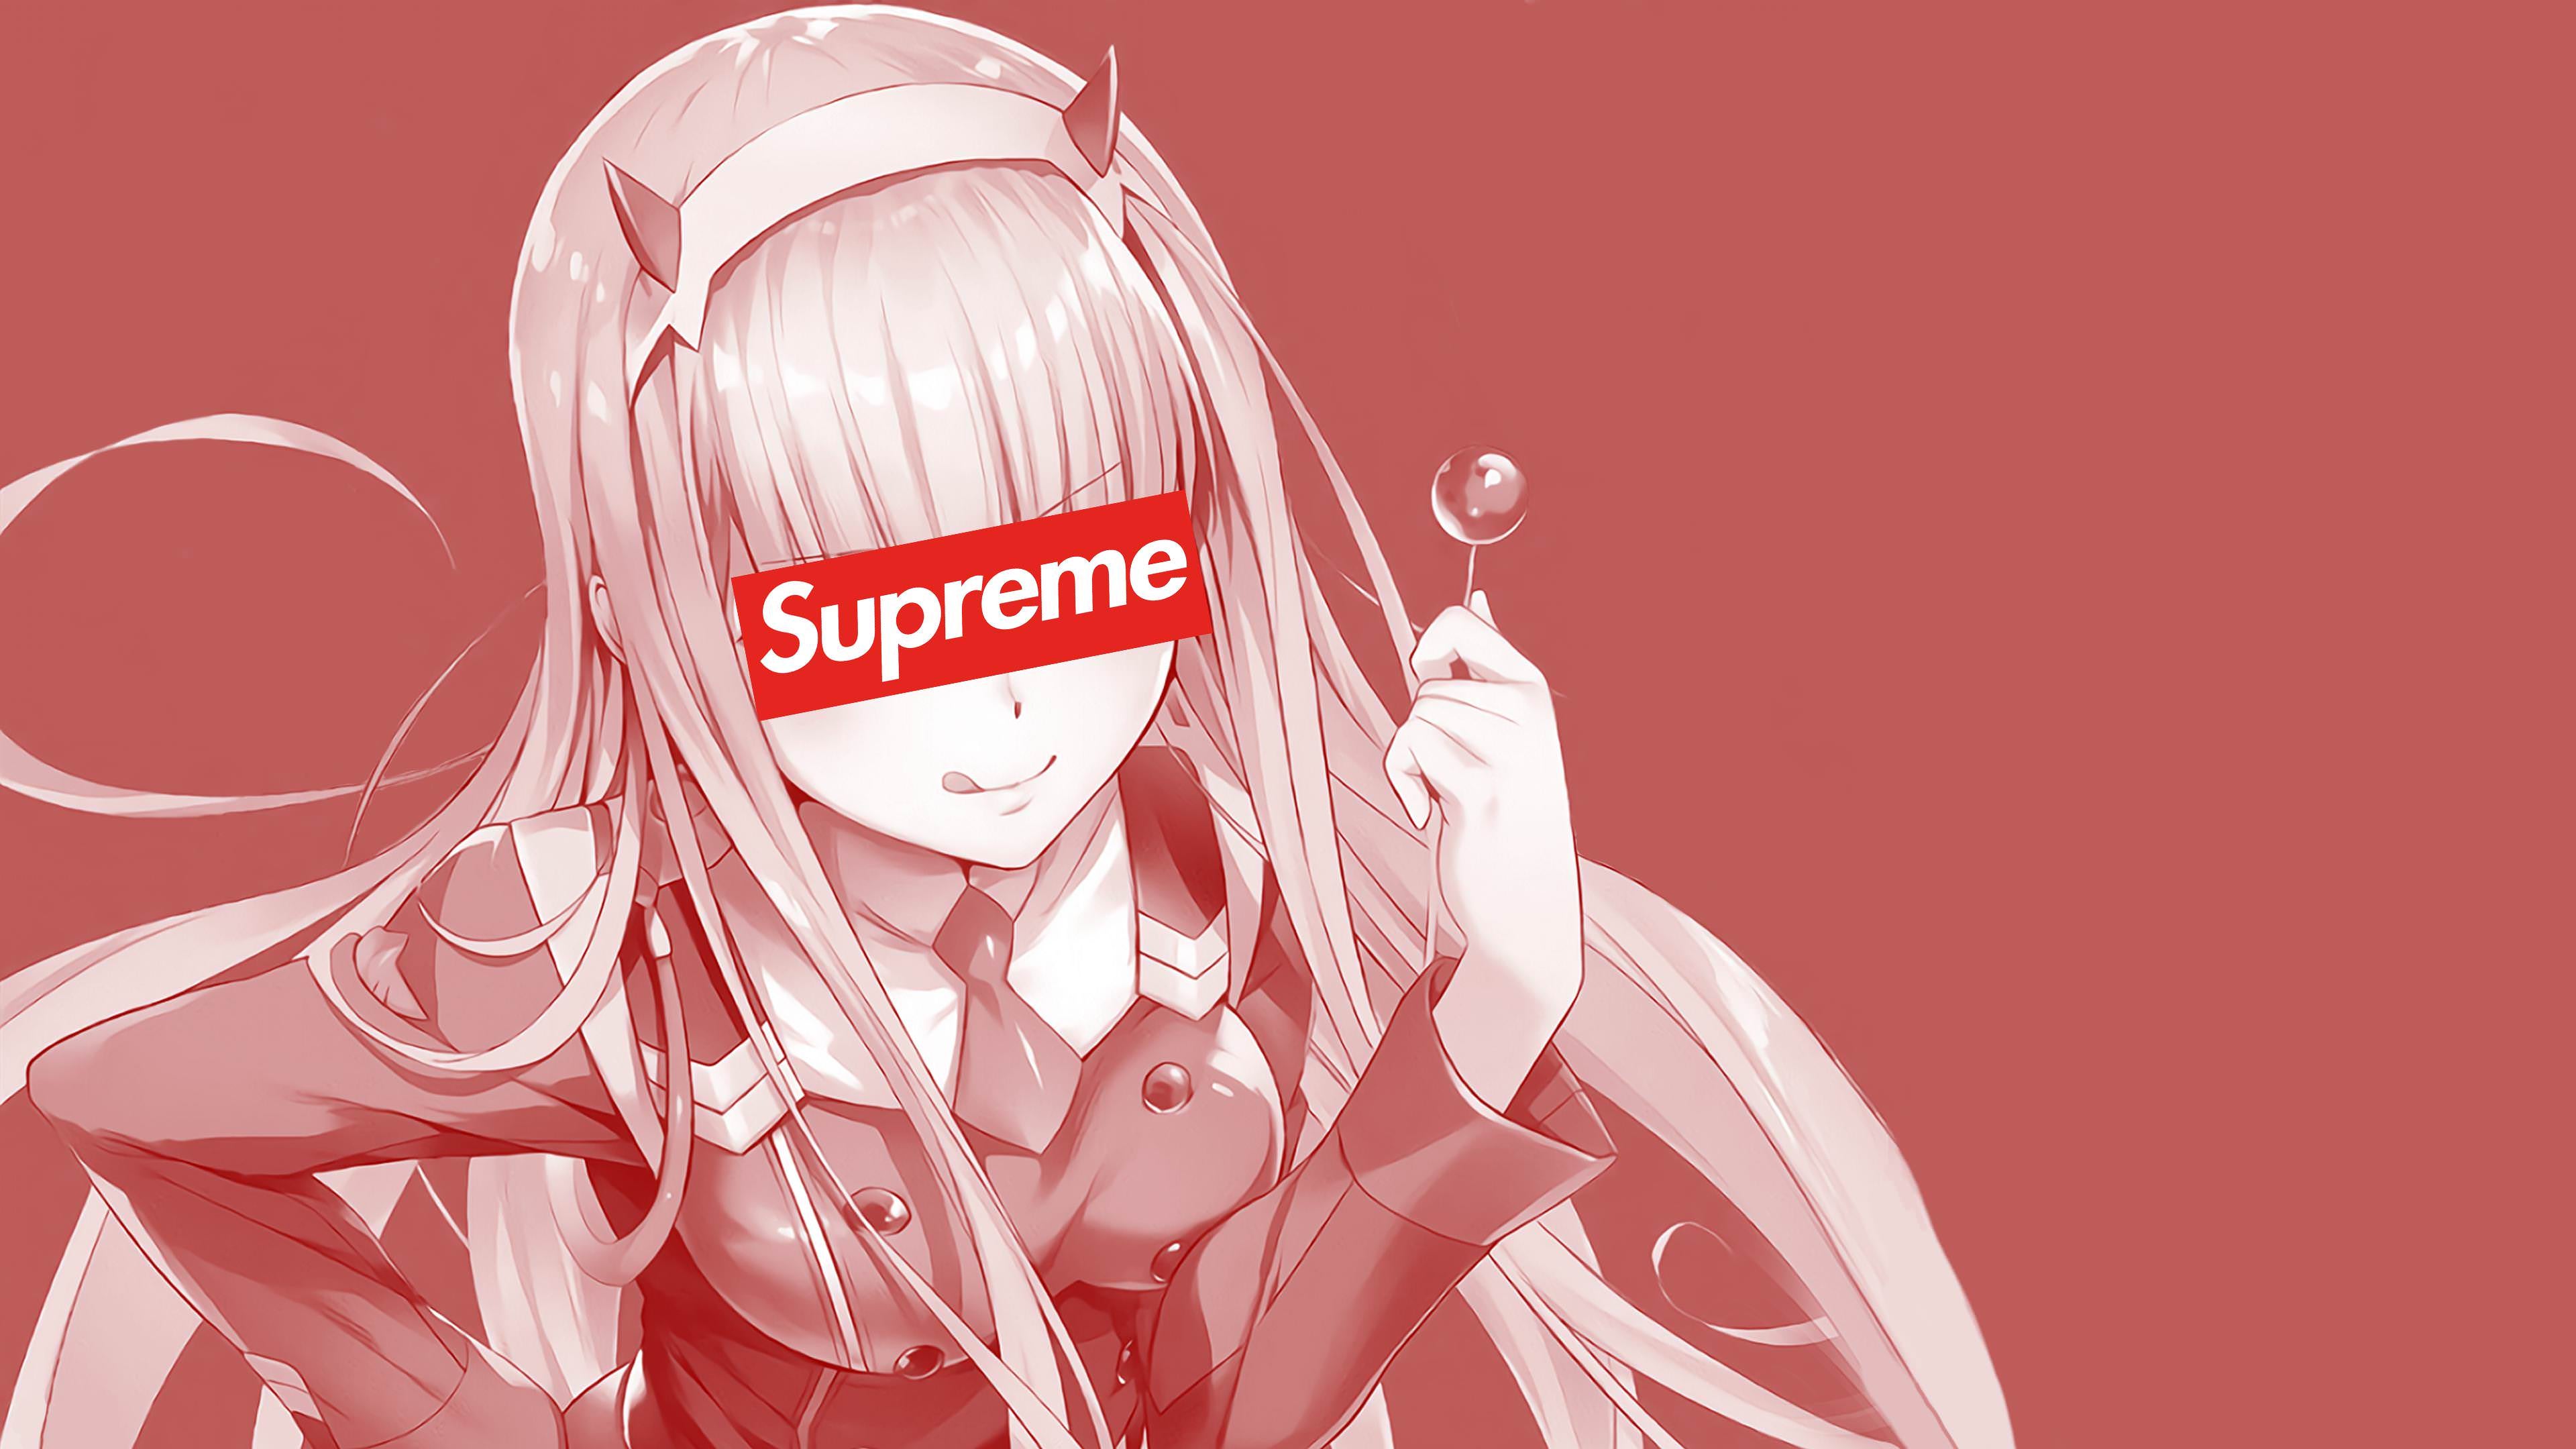 10 Supreme Brand HD Wallpapers and Backgrounds